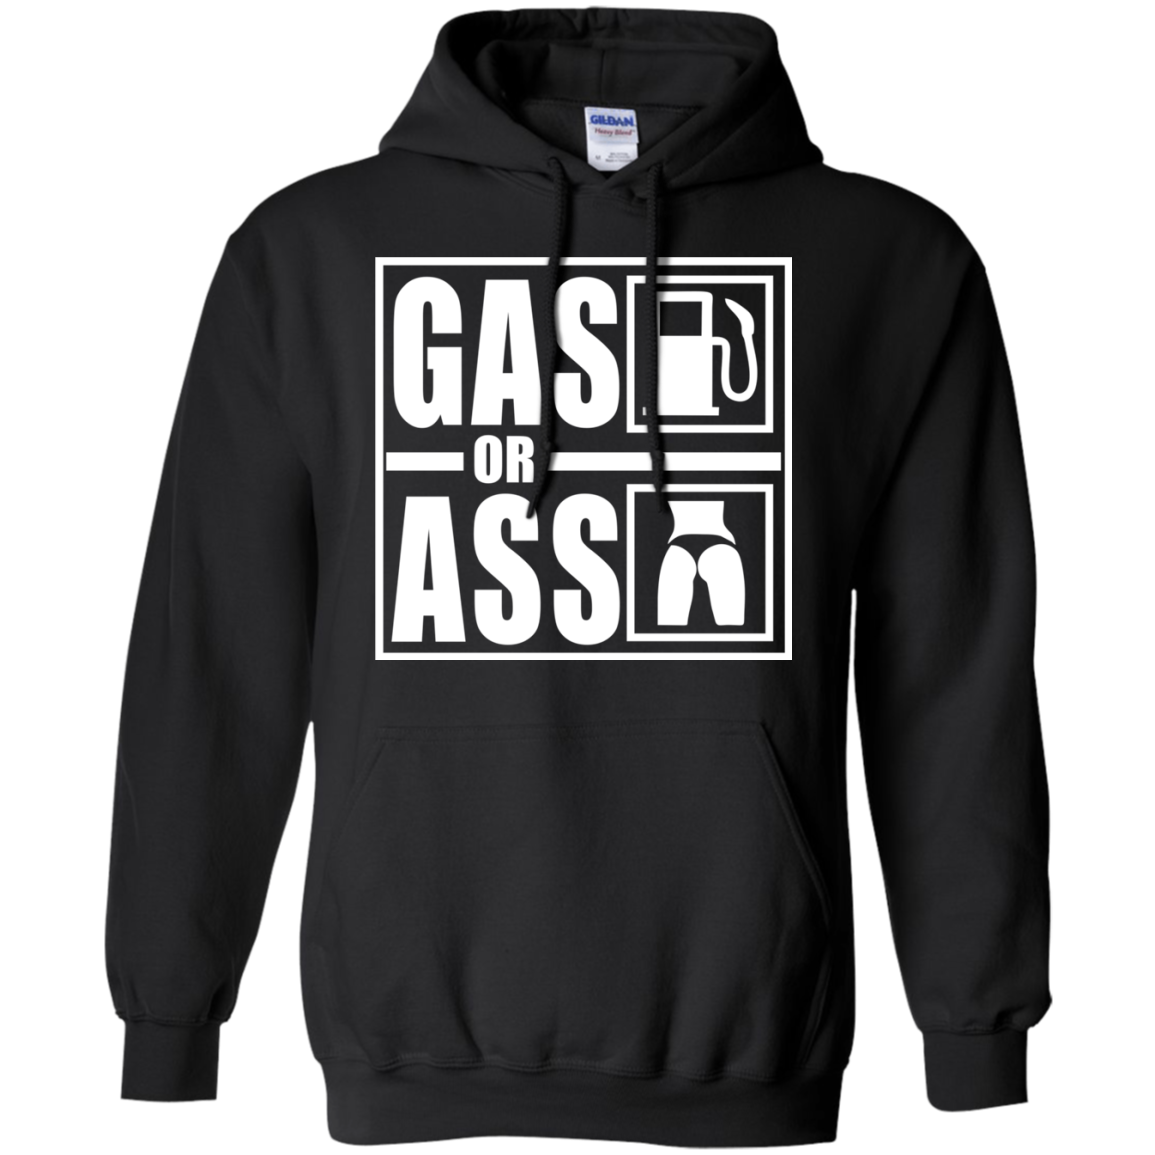 Gas Or Ass Hoodie Black Small Medium Large X-Large XX-Large XXX-Large 4XL 5XL 6XL